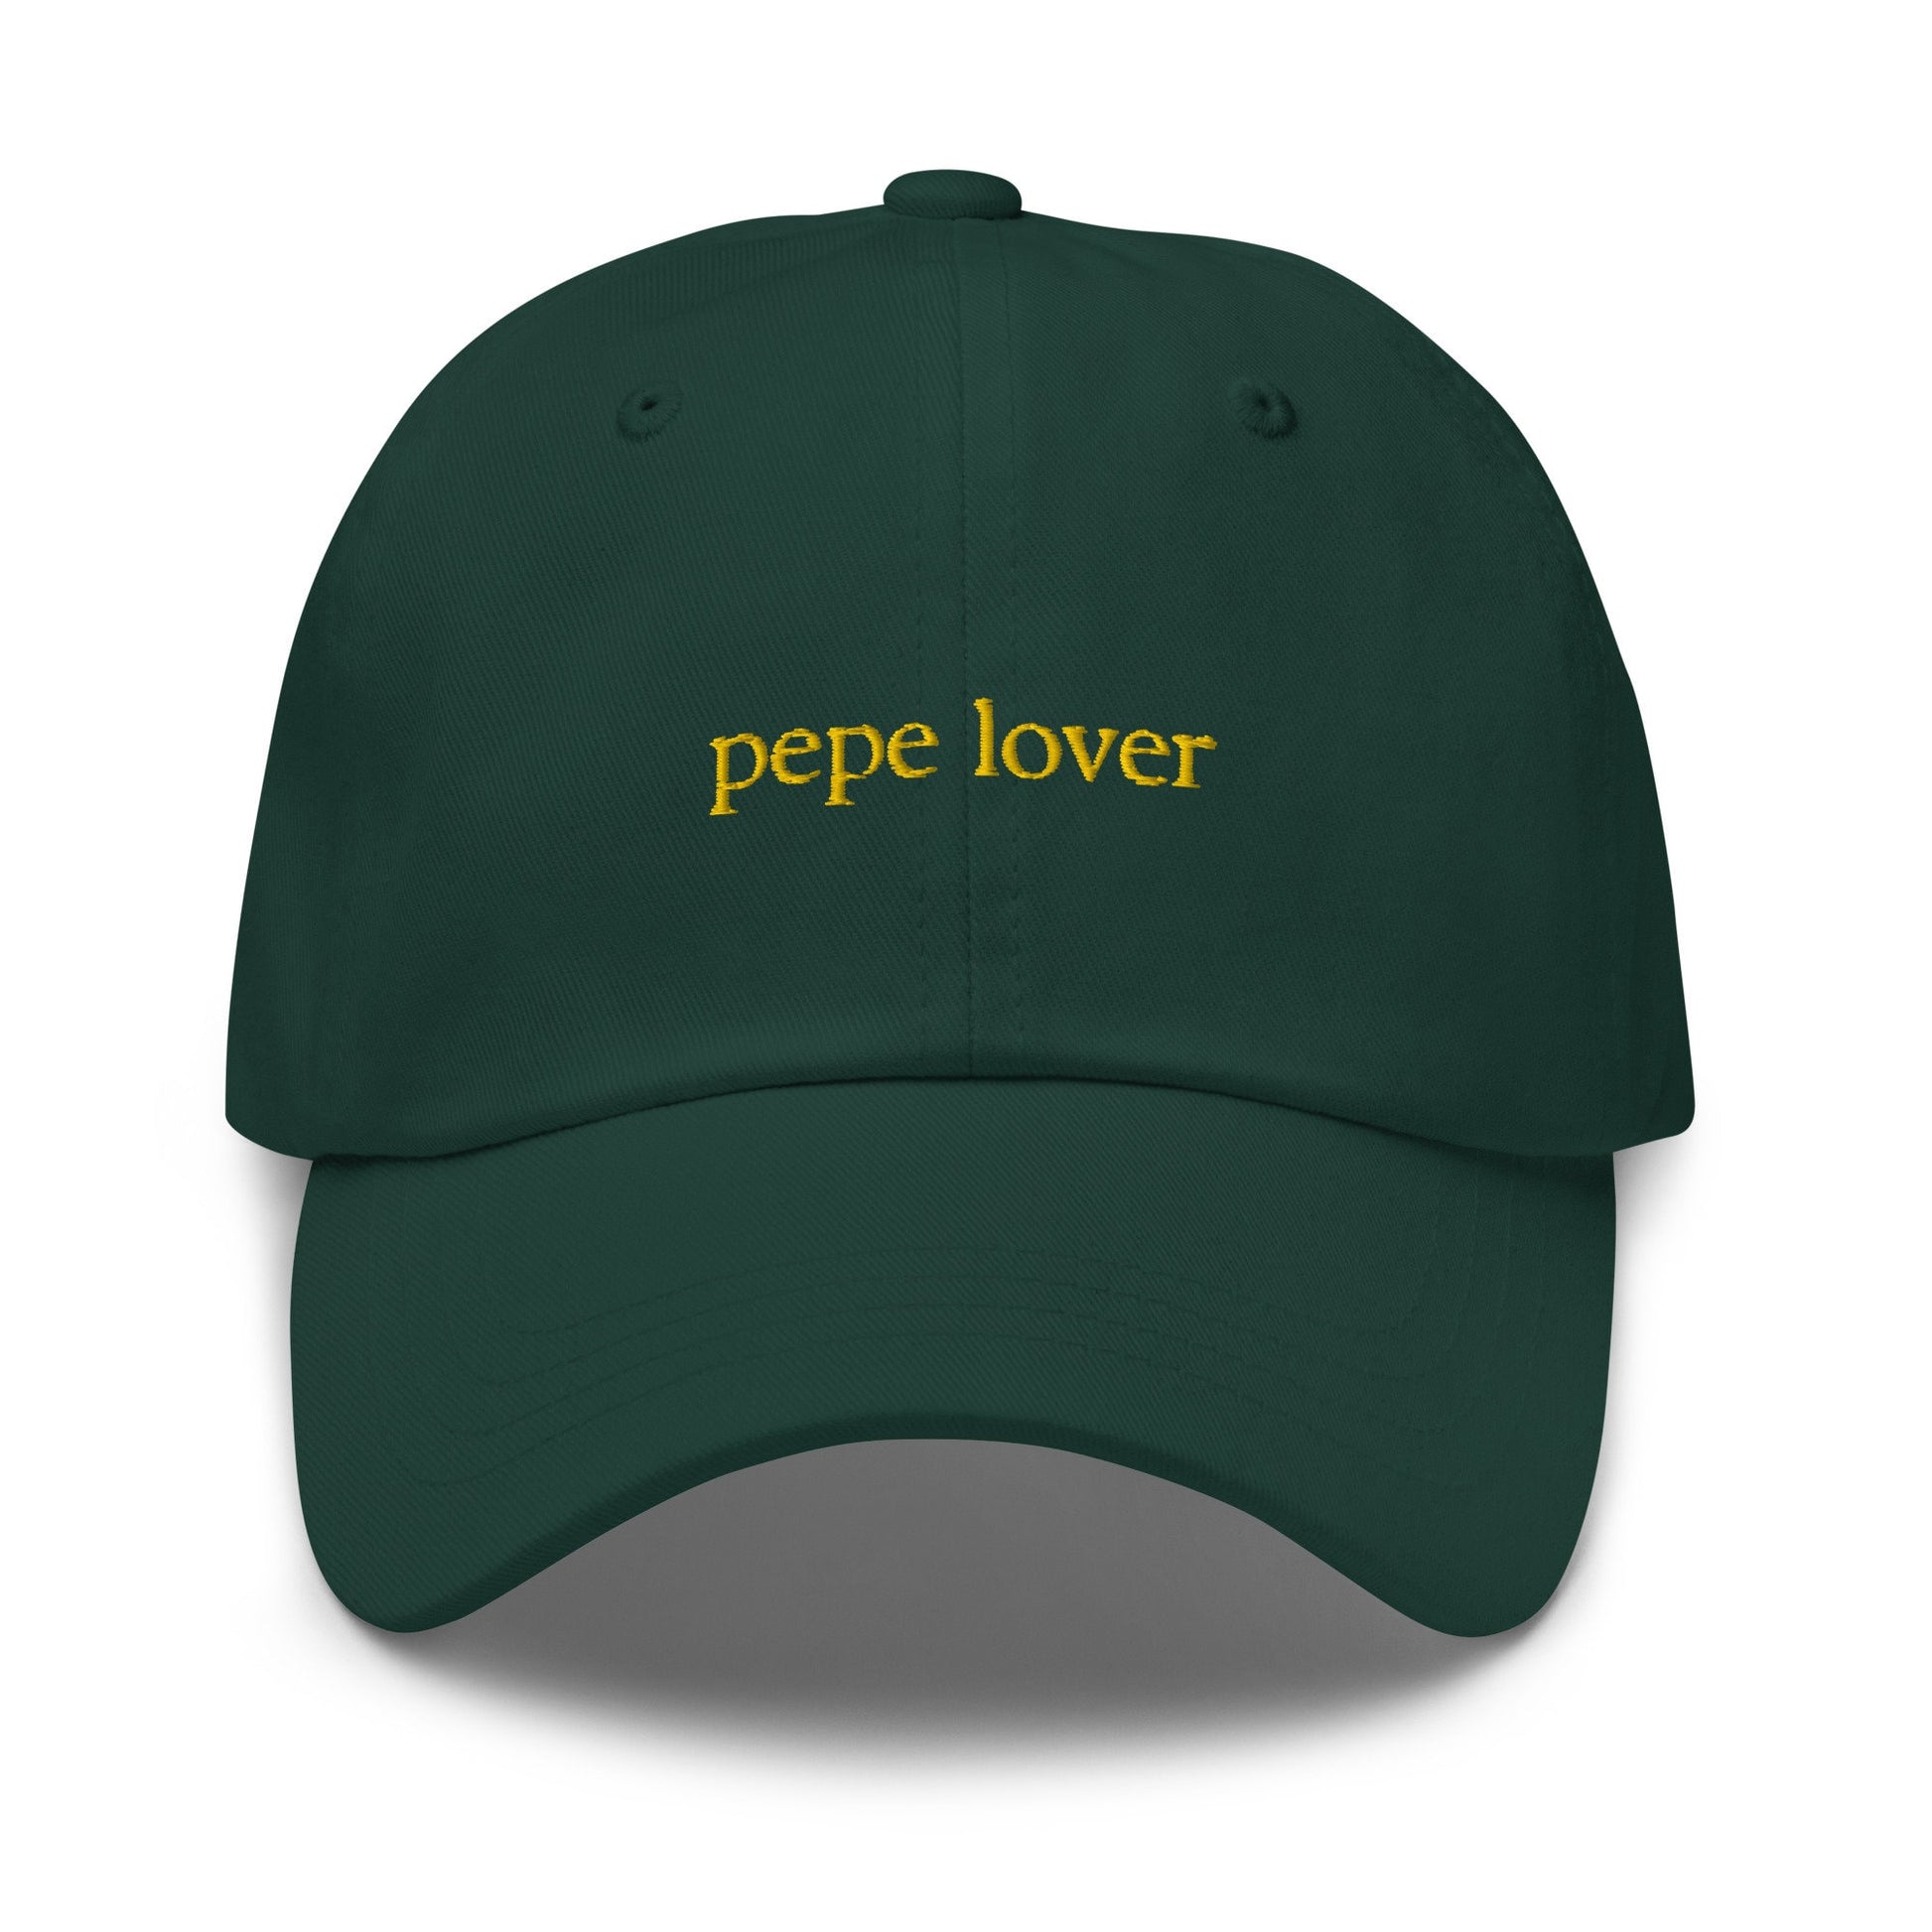 Cacio Pepe Dad Hat - Gift for Italian pepper (and cheese) pasta lovers - Cotton embroidered Cap